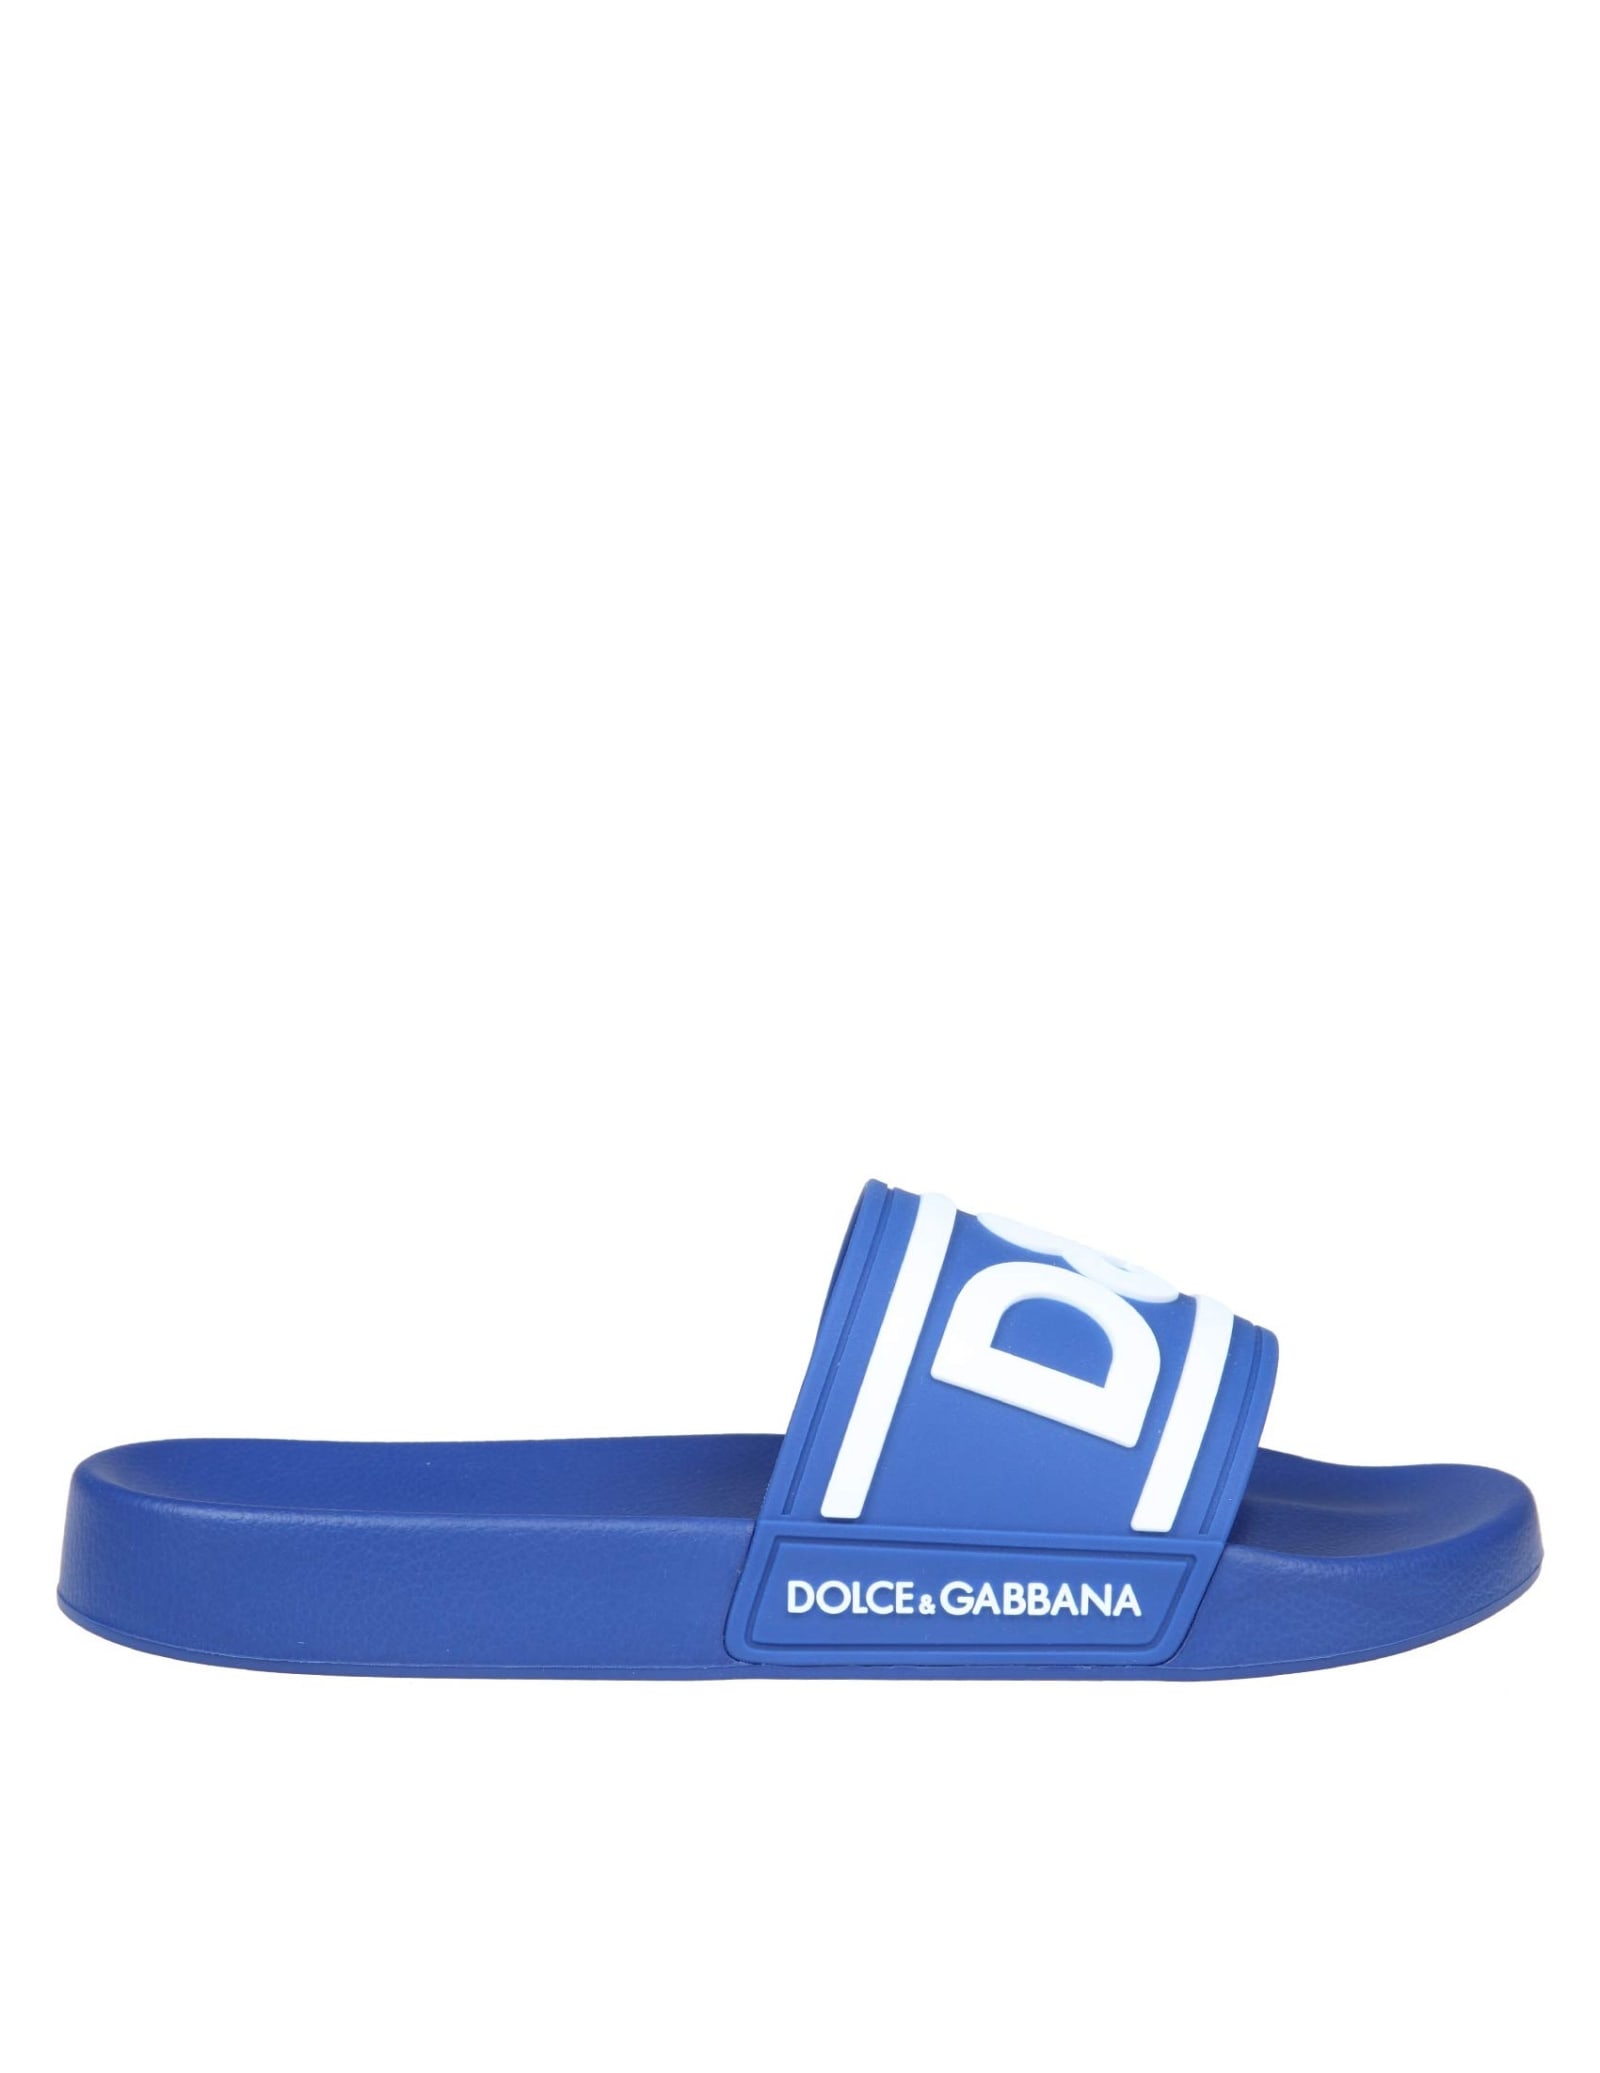 Dolce & Gabbana Rubber Slippers With Blue Color Logo